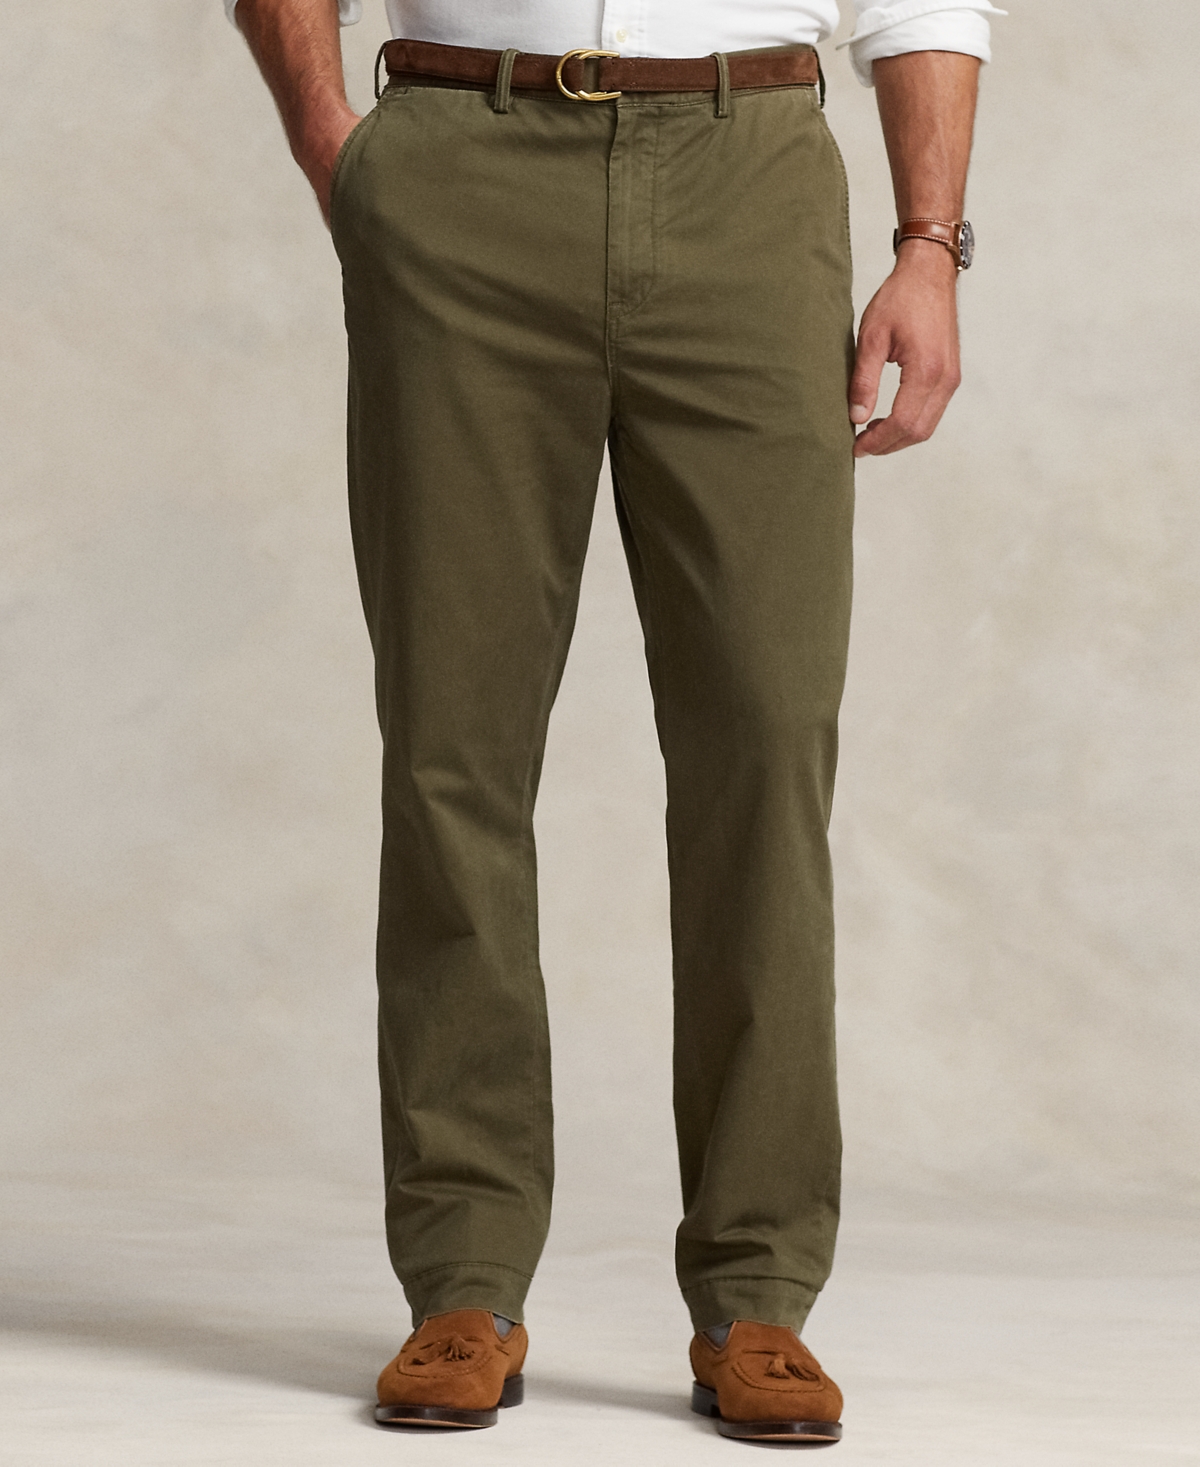 Polo Ralph Lauren Men's Big & Tall Stretch Classic Fit Sateen Pants In Armadillo